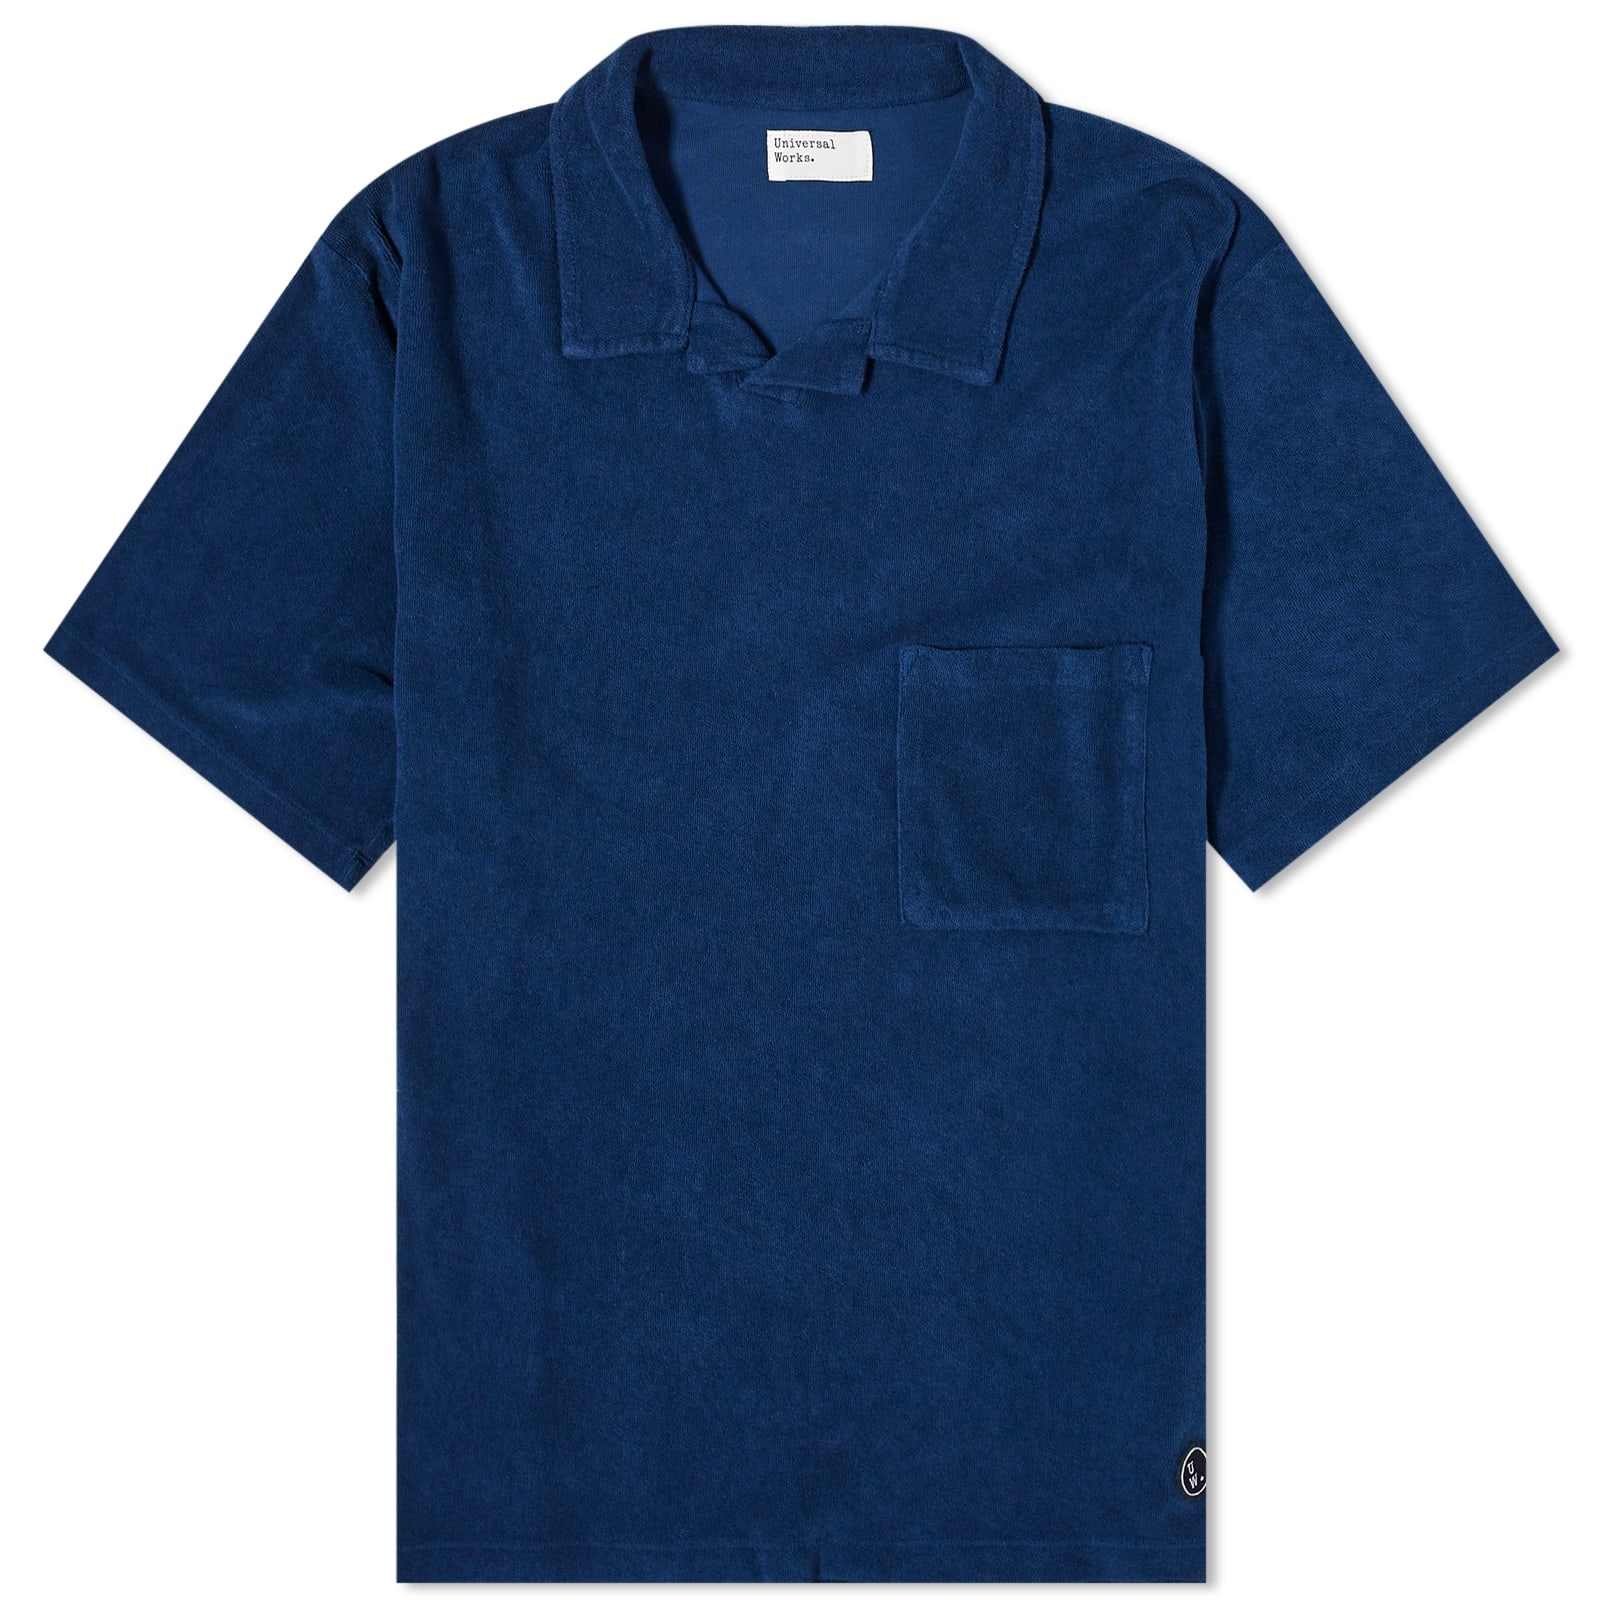 Universal Works Lightweight Terry Vacation Polo - 1